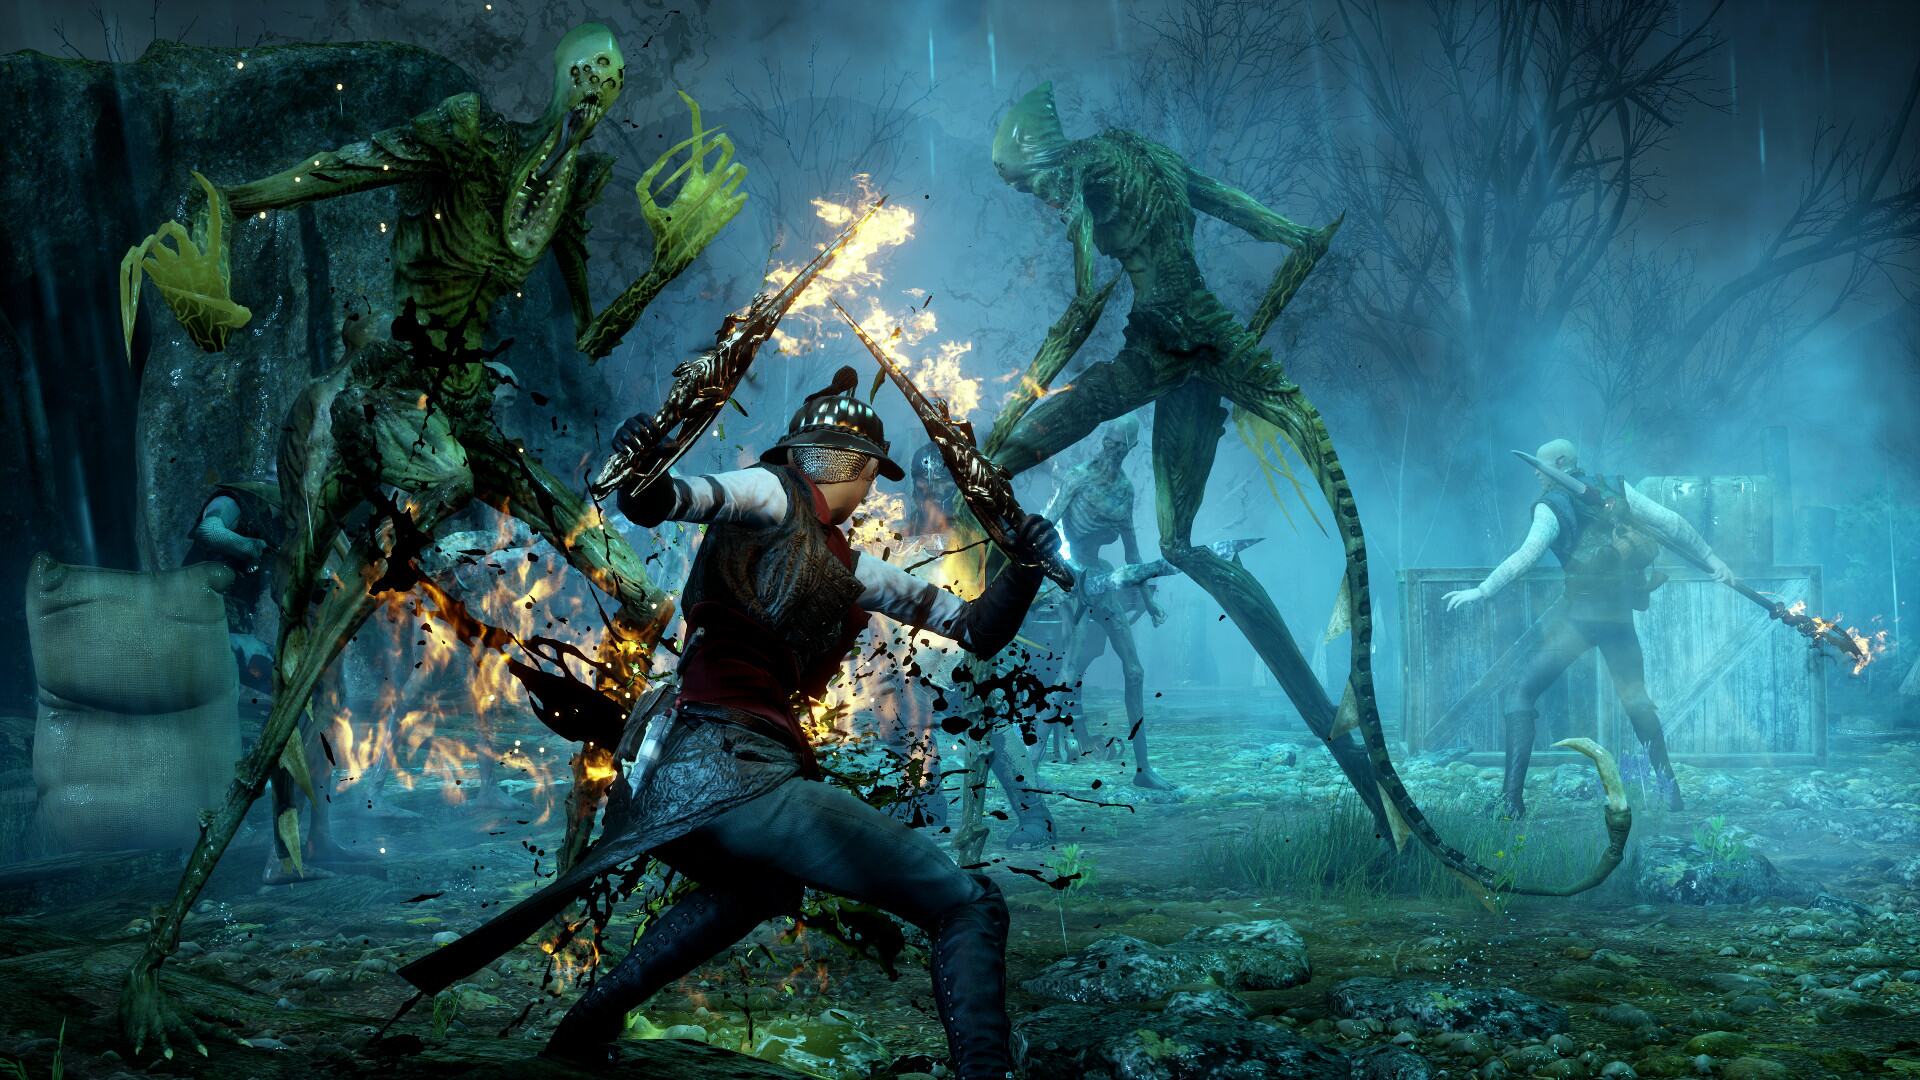 Dragon Age Inquisition has won over 130 Game of the Year awards since its successful release | Image Source: Steam